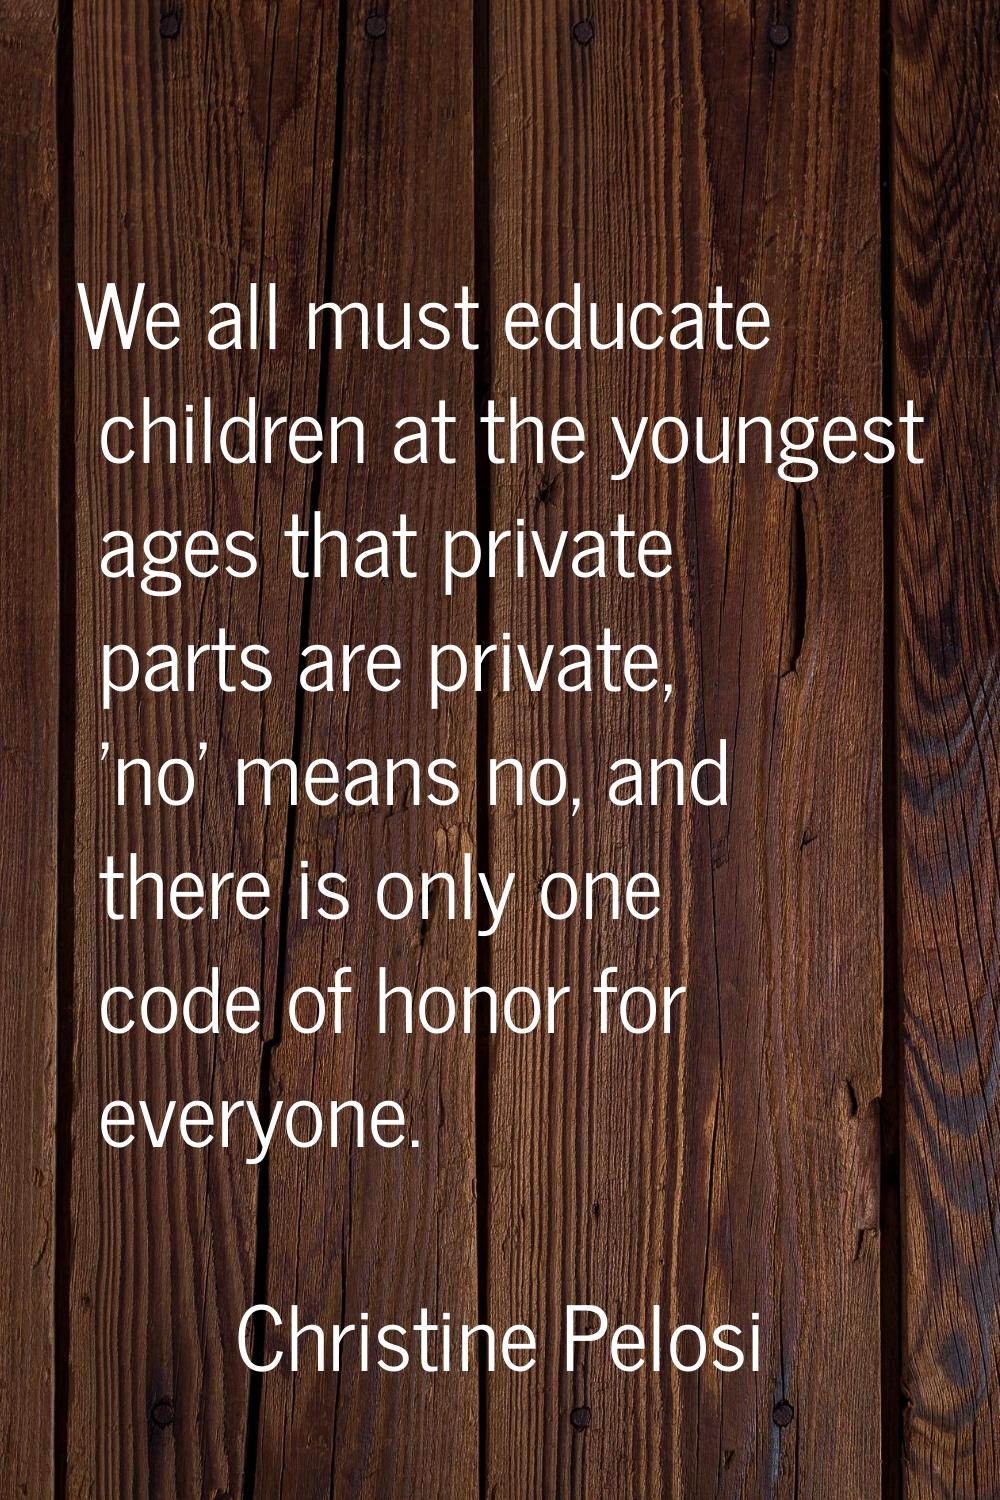 We all must educate children at the youngest ages that private parts are private, 'no' means no, an